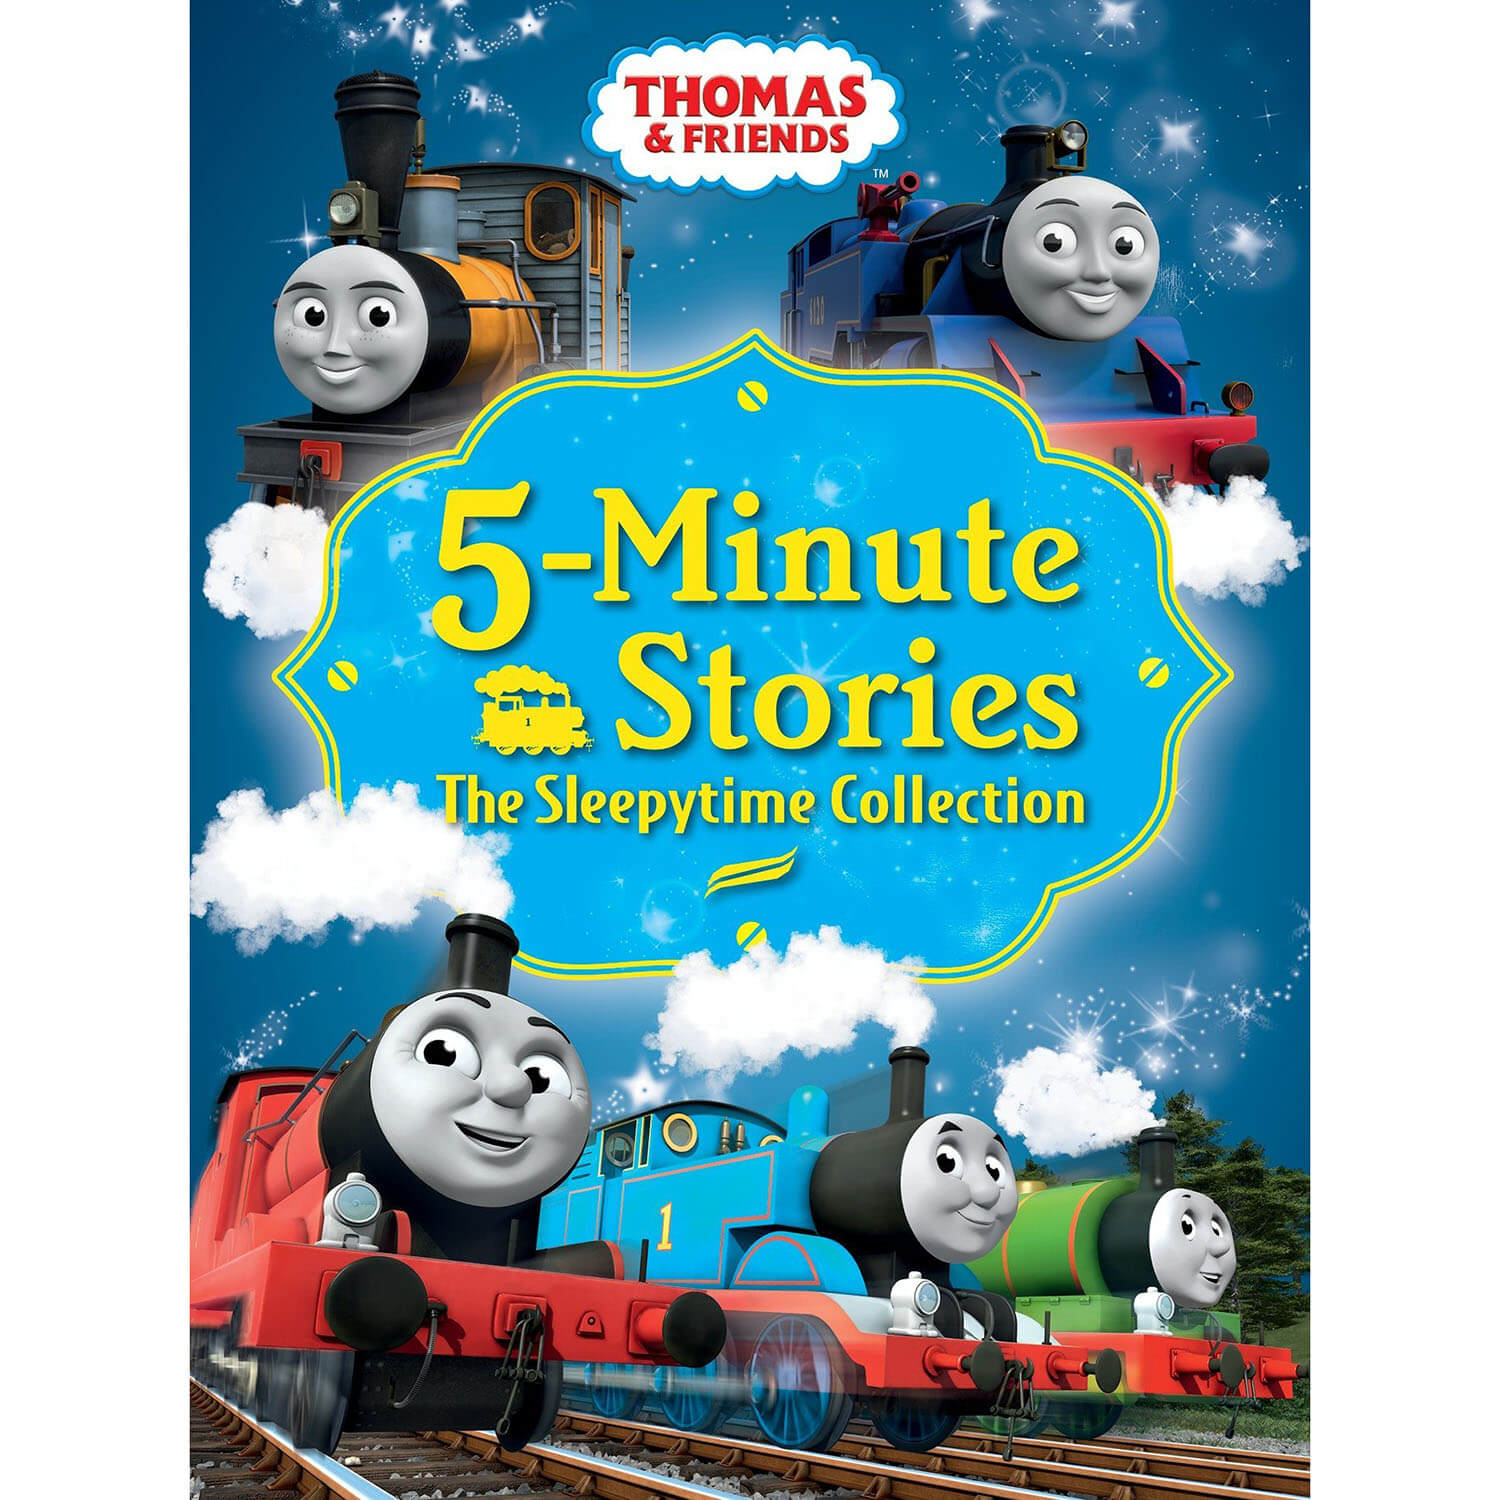 Thomas & Friends 5-Minute Stories The Sleepytime Collection